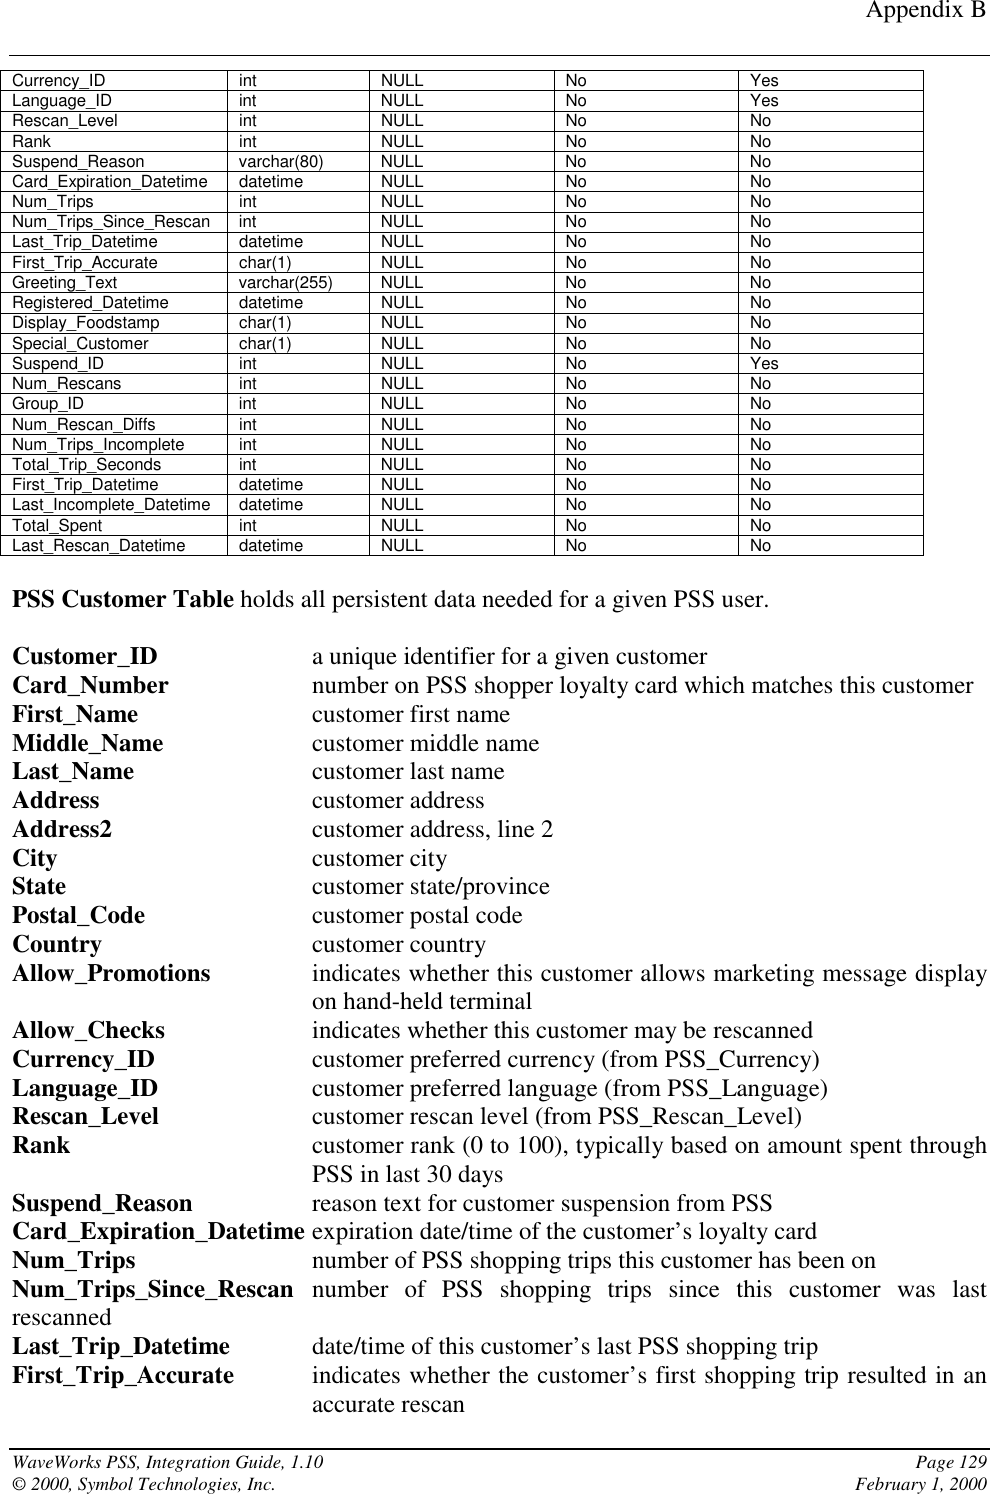 Appendix BWaveWorks PSS, Integration Guide, 1.10 Page 129© 2000, Symbol Technologies, Inc. February 1, 2000Currency_ID int NULL No YesLanguage_ID int NULL No YesRescan_Level int NULL No NoRank int NULL No NoSuspend_Reason varchar(80) NULL No NoCard_Expiration_Datetime datetime NULL No NoNum_Trips int NULL No NoNum_Trips_Since_Rescan int NULL No NoLast_Trip_Datetime datetime NULL No NoFirst_Trip_Accurate char(1) NULL No NoGreeting_Text varchar(255) NULL No NoRegistered_Datetime datetime NULL No NoDisplay_Foodstamp char(1) NULL No NoSpecial_Customer char(1) NULL No NoSuspend_ID int NULL No YesNum_Rescans int NULL No NoGroup_ID int NULL No NoNum_Rescan_Diffs int NULL No NoNum_Trips_Incomplete int NULL No NoTotal_Trip_Seconds int NULL No NoFirst_Trip_Datetime datetime NULL No NoLast_Incomplete_Datetime datetime NULL No NoTotal_Spent int NULL No NoLast_Rescan_Datetime datetime NULL No NoPSS Customer Table holds all persistent data needed for a given PSS user.Customer_ID  a unique identifier for a given customerCard_Number number on PSS shopper loyalty card which matches this customerFirst_Name customer first nameMiddle_Name customer middle nameLast_Name customer last nameAddress customer addressAddress2 customer address, line 2City customer cityState customer state/provincePostal_Code customer postal codeCountry customer countryAllow_Promotions indicates whether this customer allows marketing message displayon hand-held terminalAllow_Checks indicates whether this customer may be rescannedCurrency_ID customer preferred currency (from PSS_Currency)Language_ID customer preferred language (from PSS_Language)Rescan_Level customer rescan level (from PSS_Rescan_Level)Rank customer rank (0 to 100), typically based on amount spent throughPSS in last 30 daysSuspend_Reason reason text for customer suspension from PSSCard_Expiration_Datetime expiration date/time of the customer’s loyalty cardNum_Trips number of PSS shopping trips this customer has been onNum_Trips_Since_Rescan number of PSS shopping trips since this customer was lastrescannedLast_Trip_Datetime date/time of this customer’s last PSS shopping tripFirst_Trip_Accurate indicates whether the customer’s first shopping trip resulted in anaccurate rescan